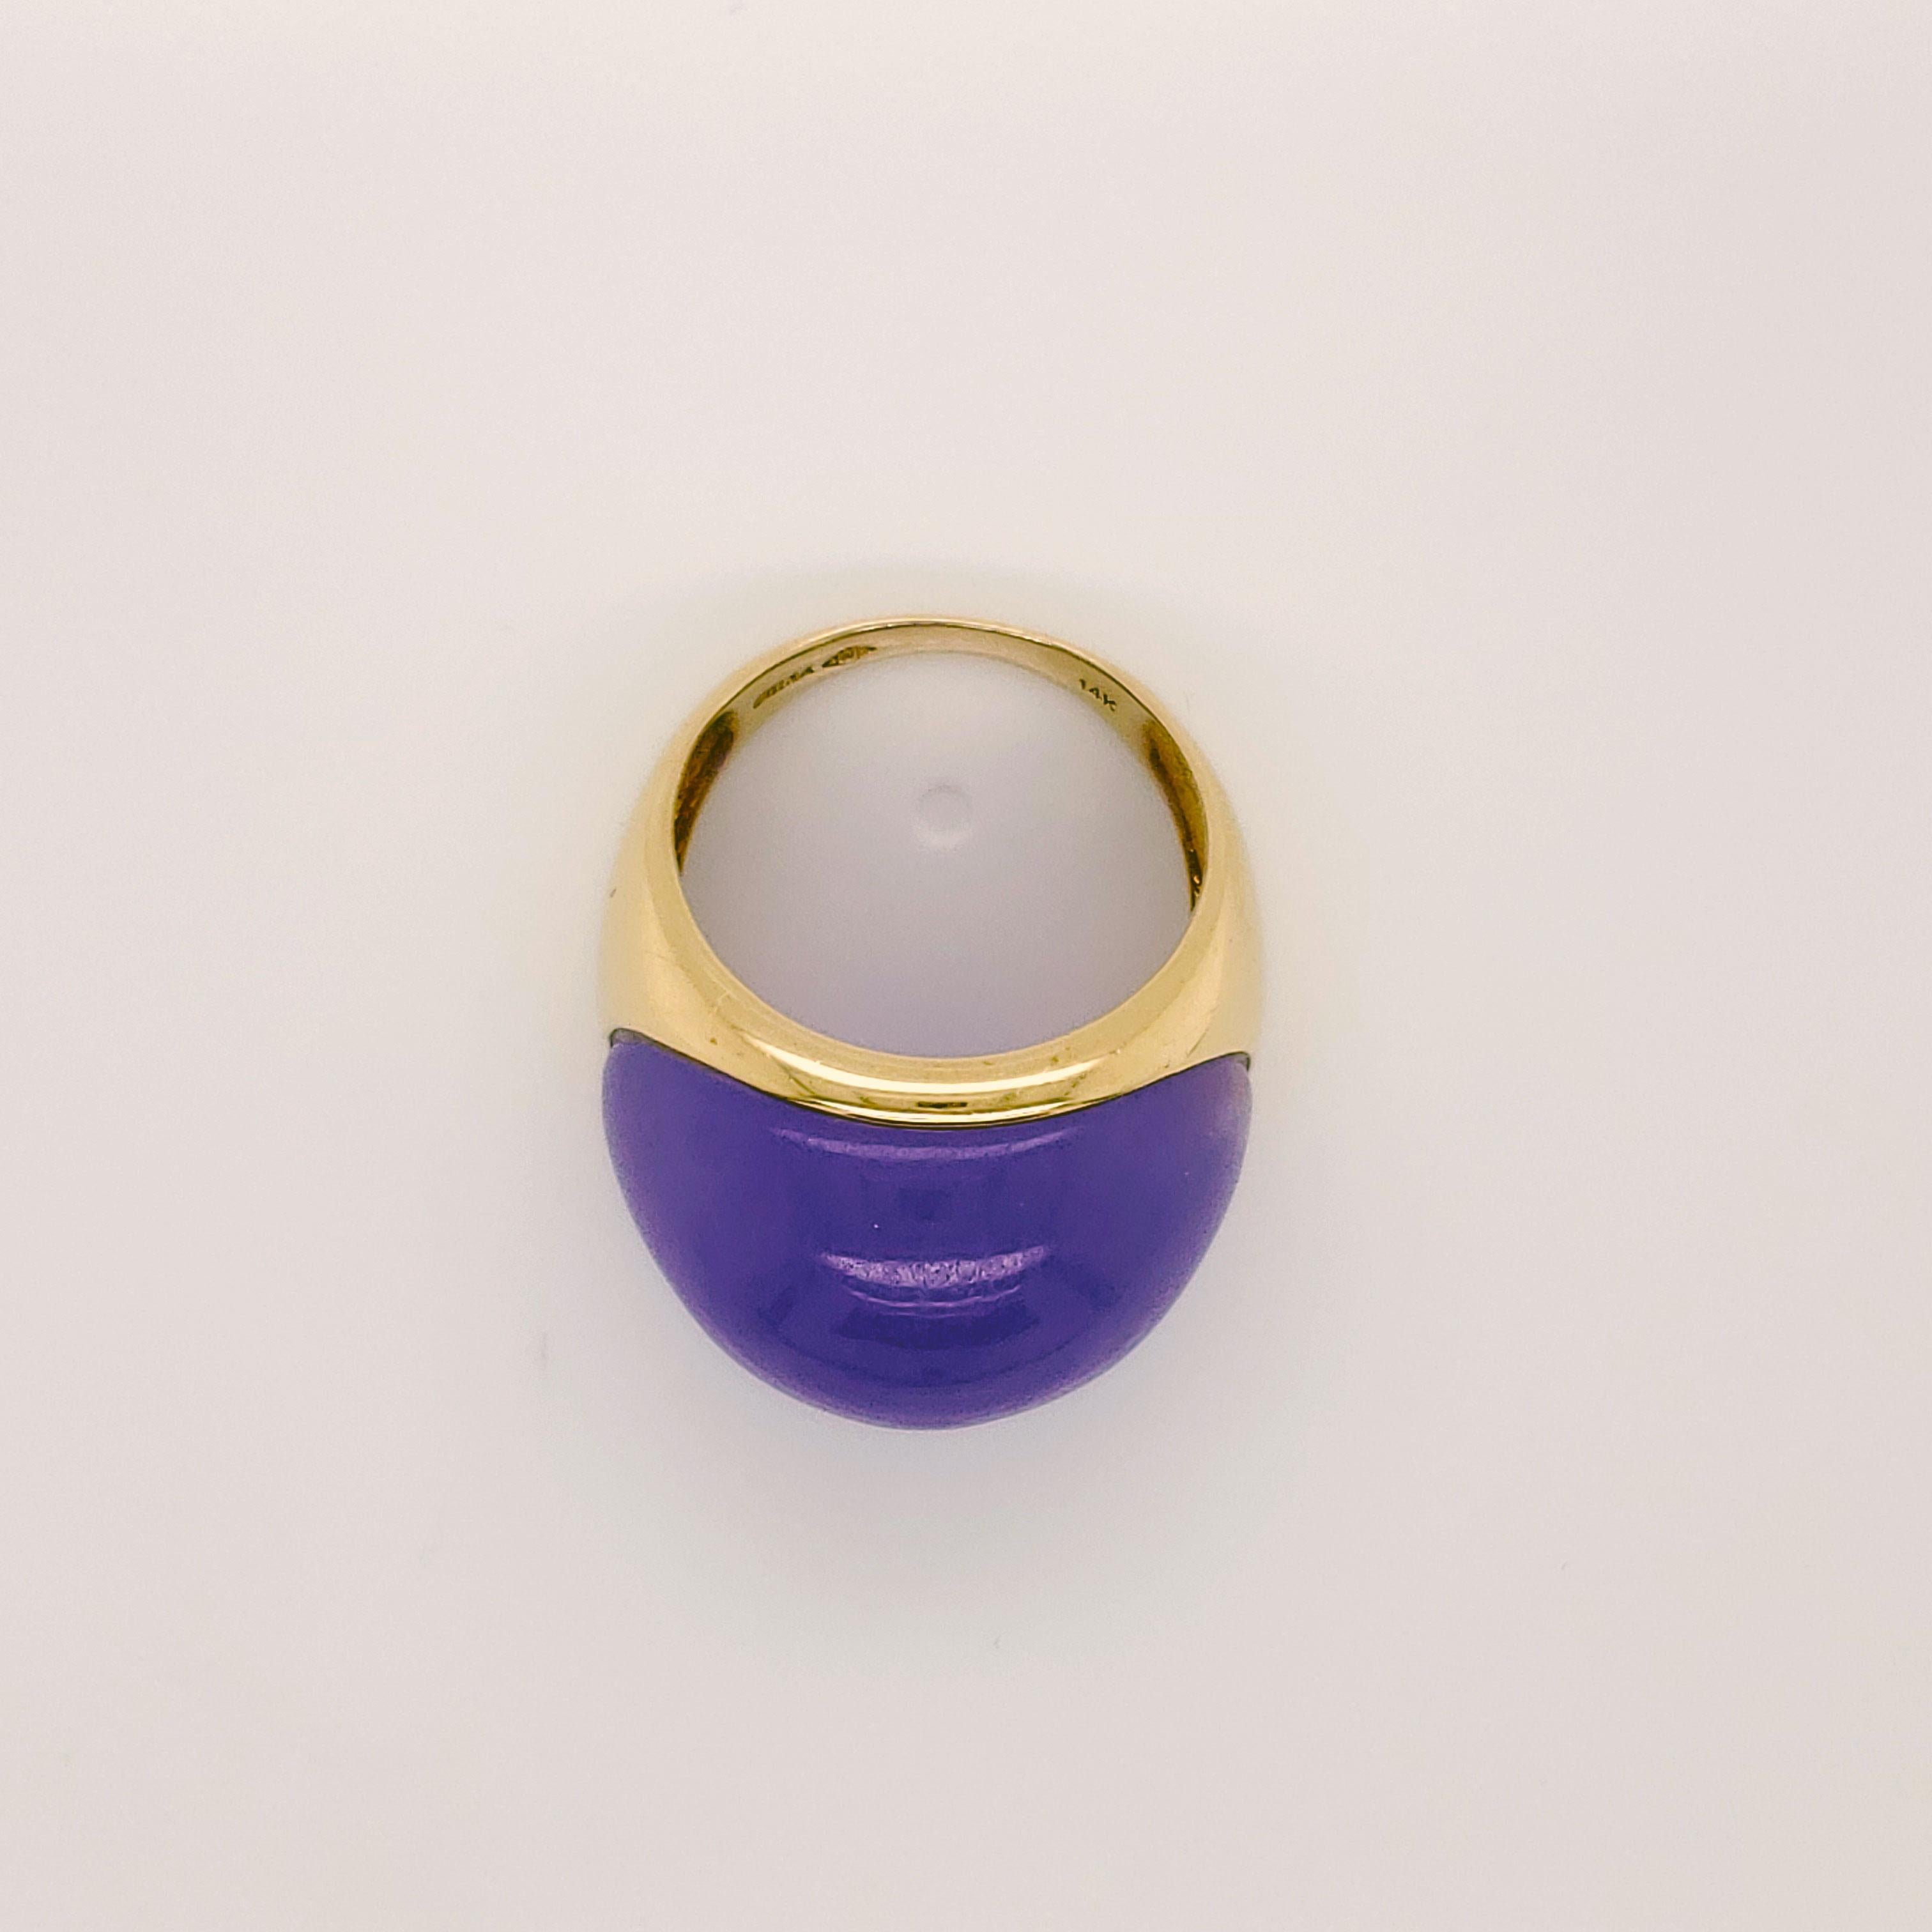 Cabochon SJM Contemporary Lavender Jade in 14 Karat Yellow Gold Ring